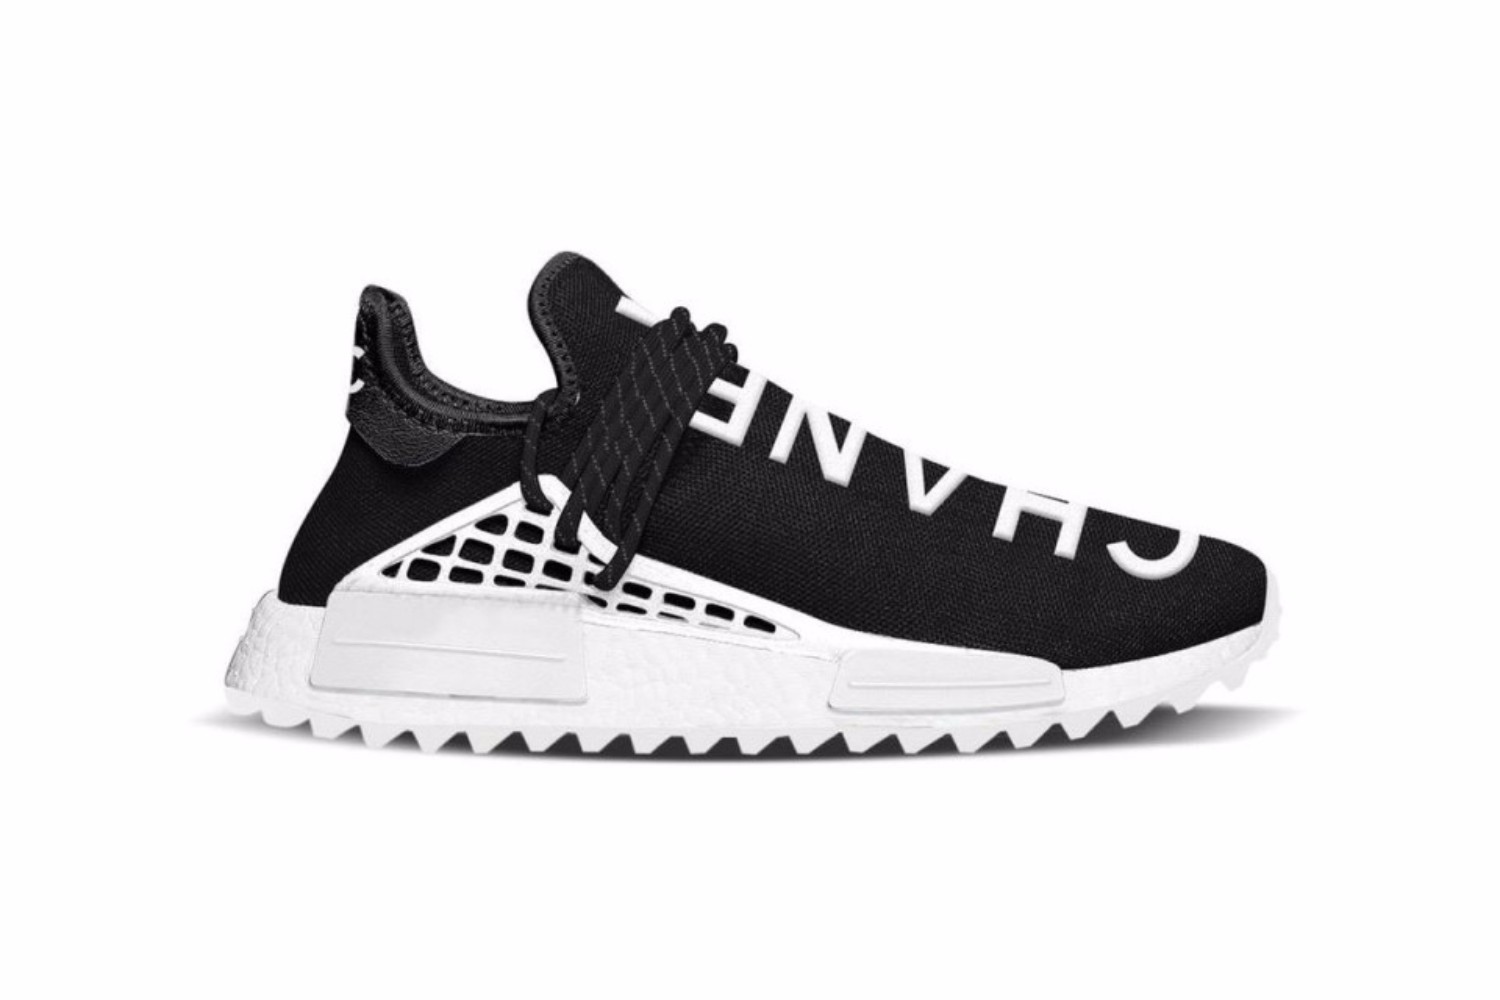 How & Where to Purchase the Chanel x adidas x Pharrell NMD Hu